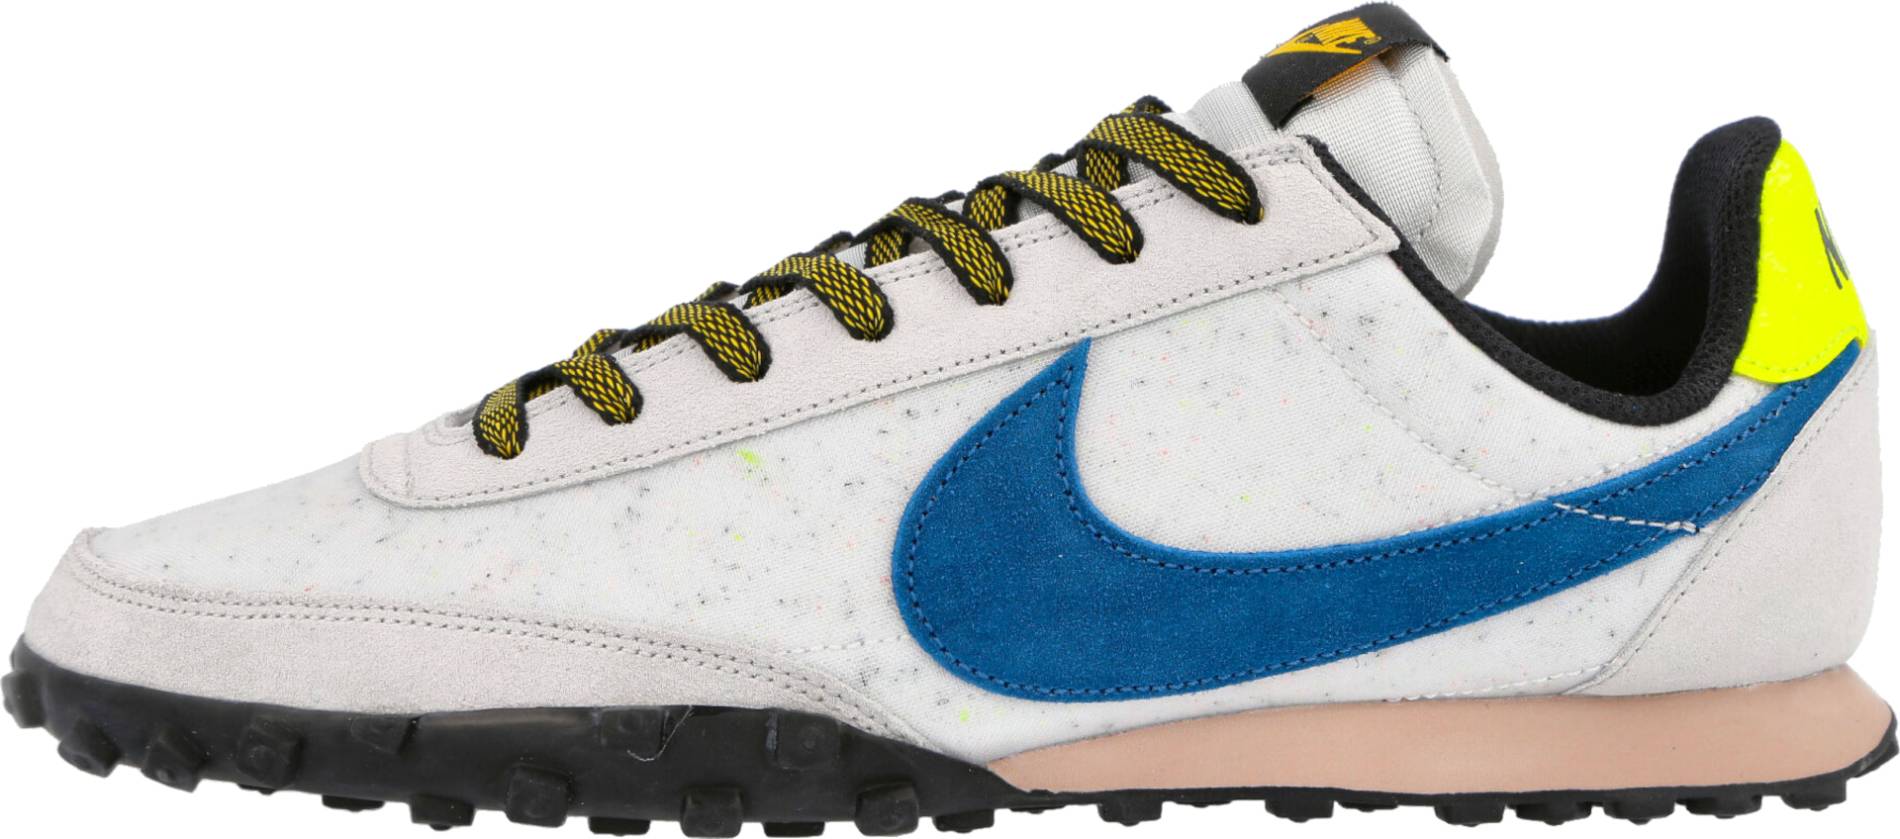 Nike mens waffle nike Waffle Racer sneakers in 5 colors (only $30) | RunRepeat